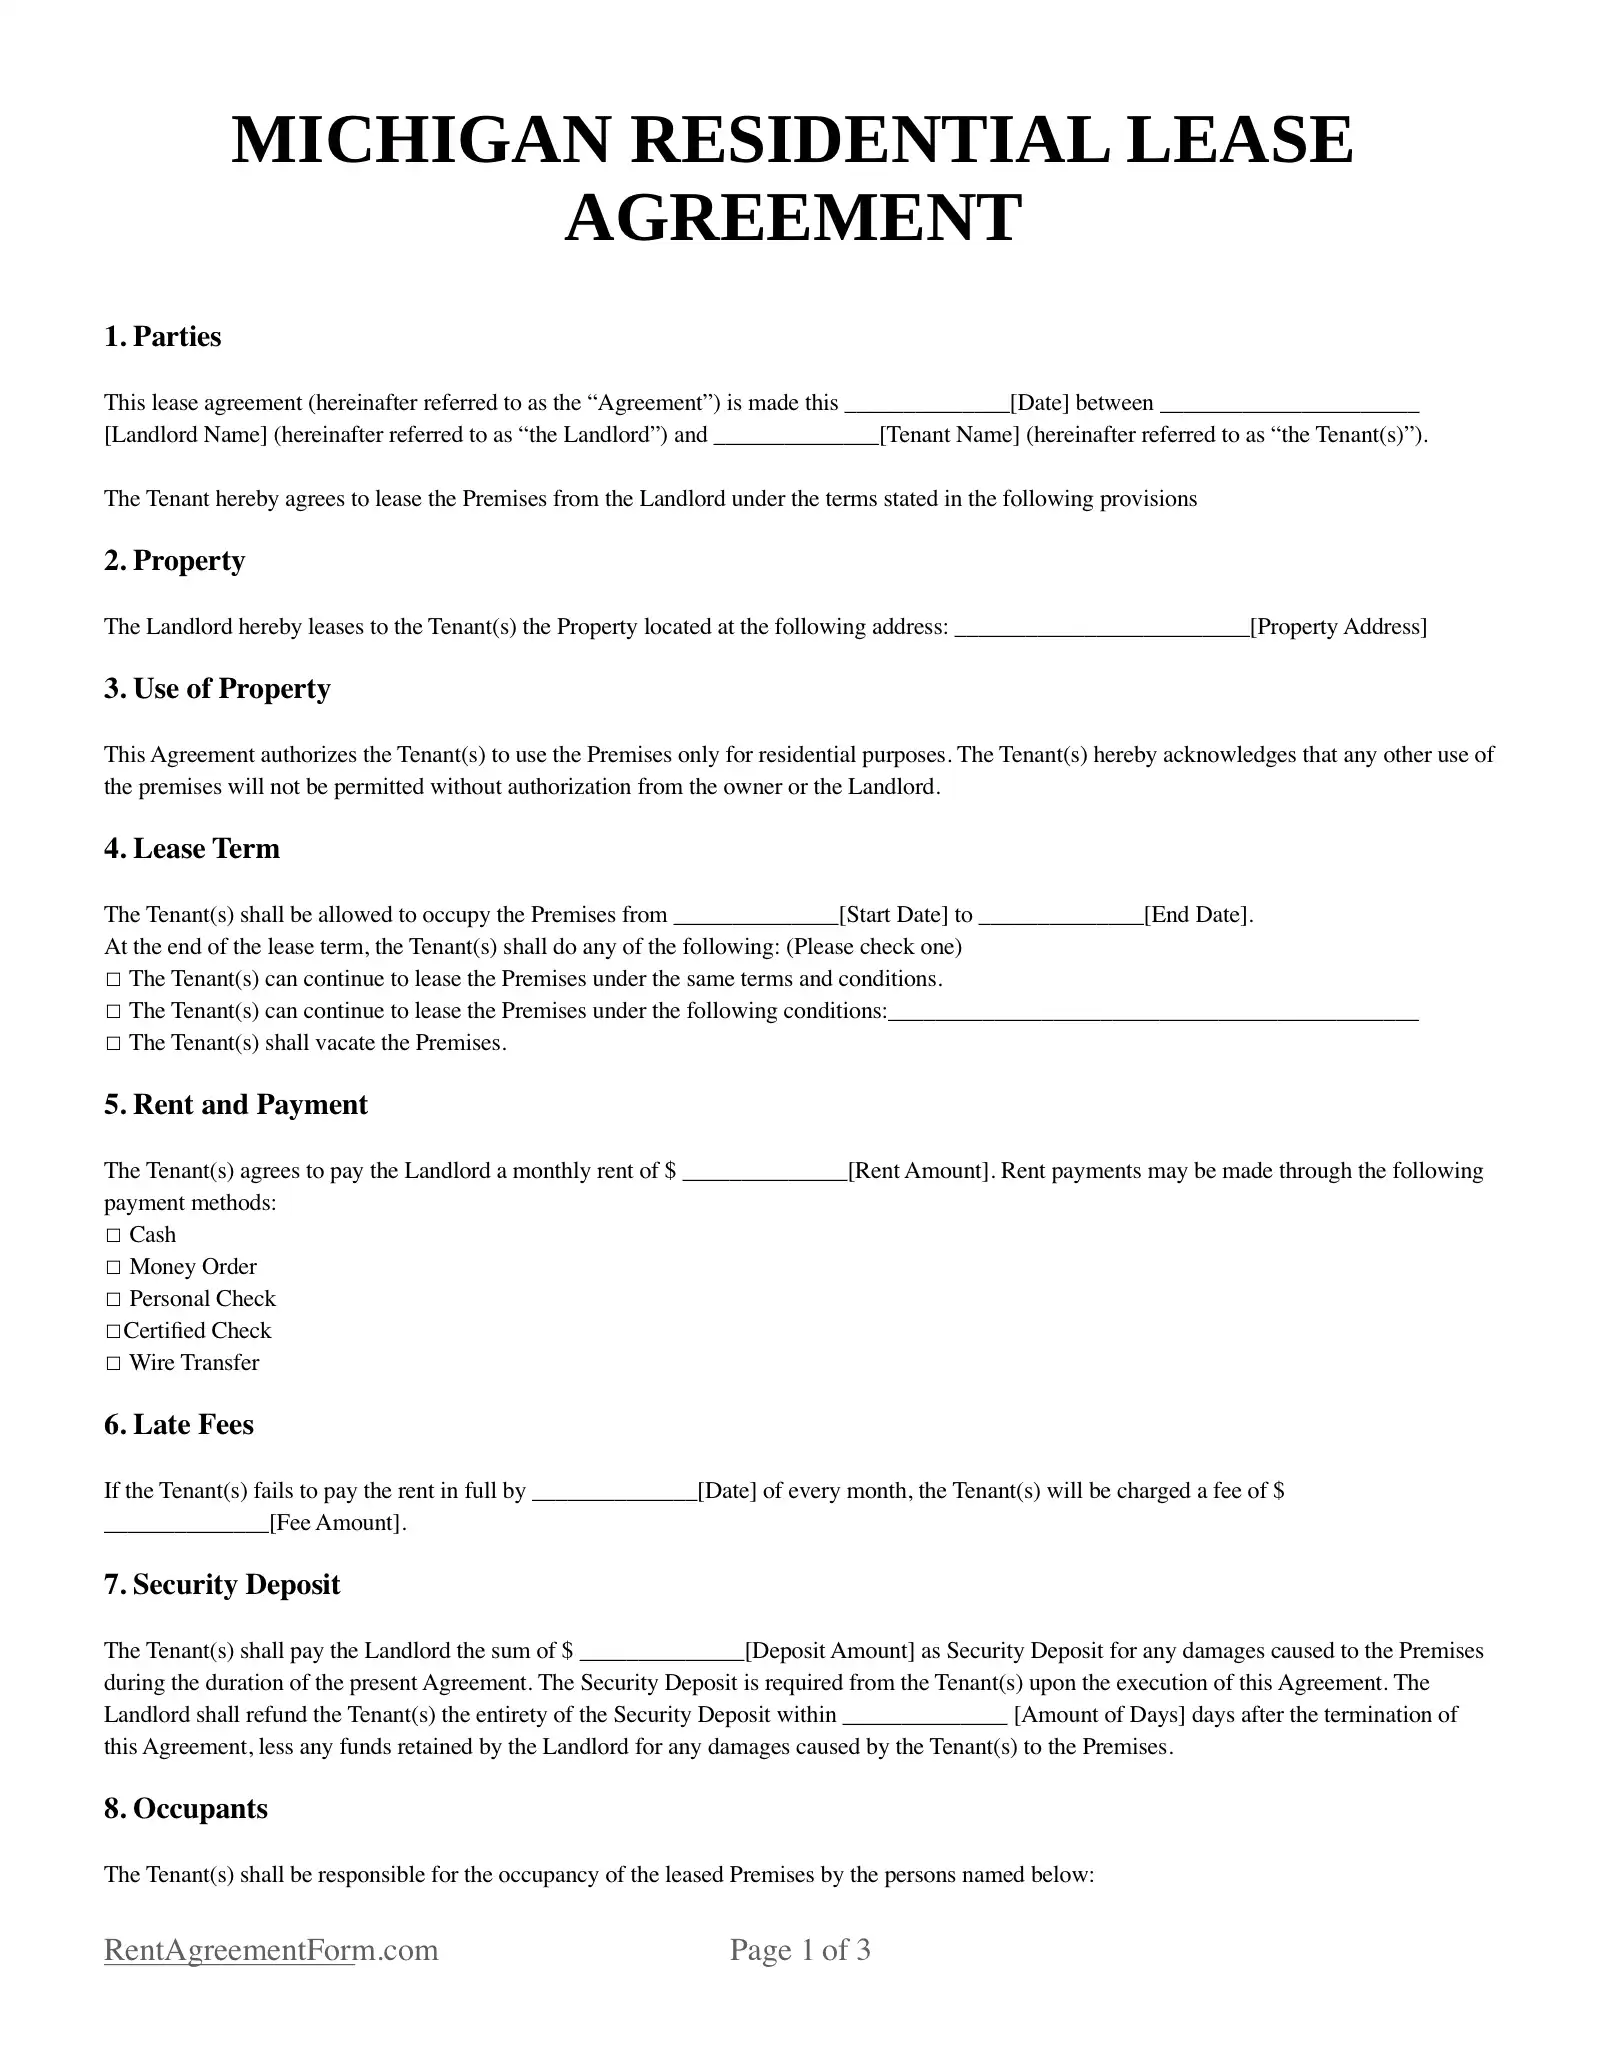 Michigan Residential Lease Agreement Sample